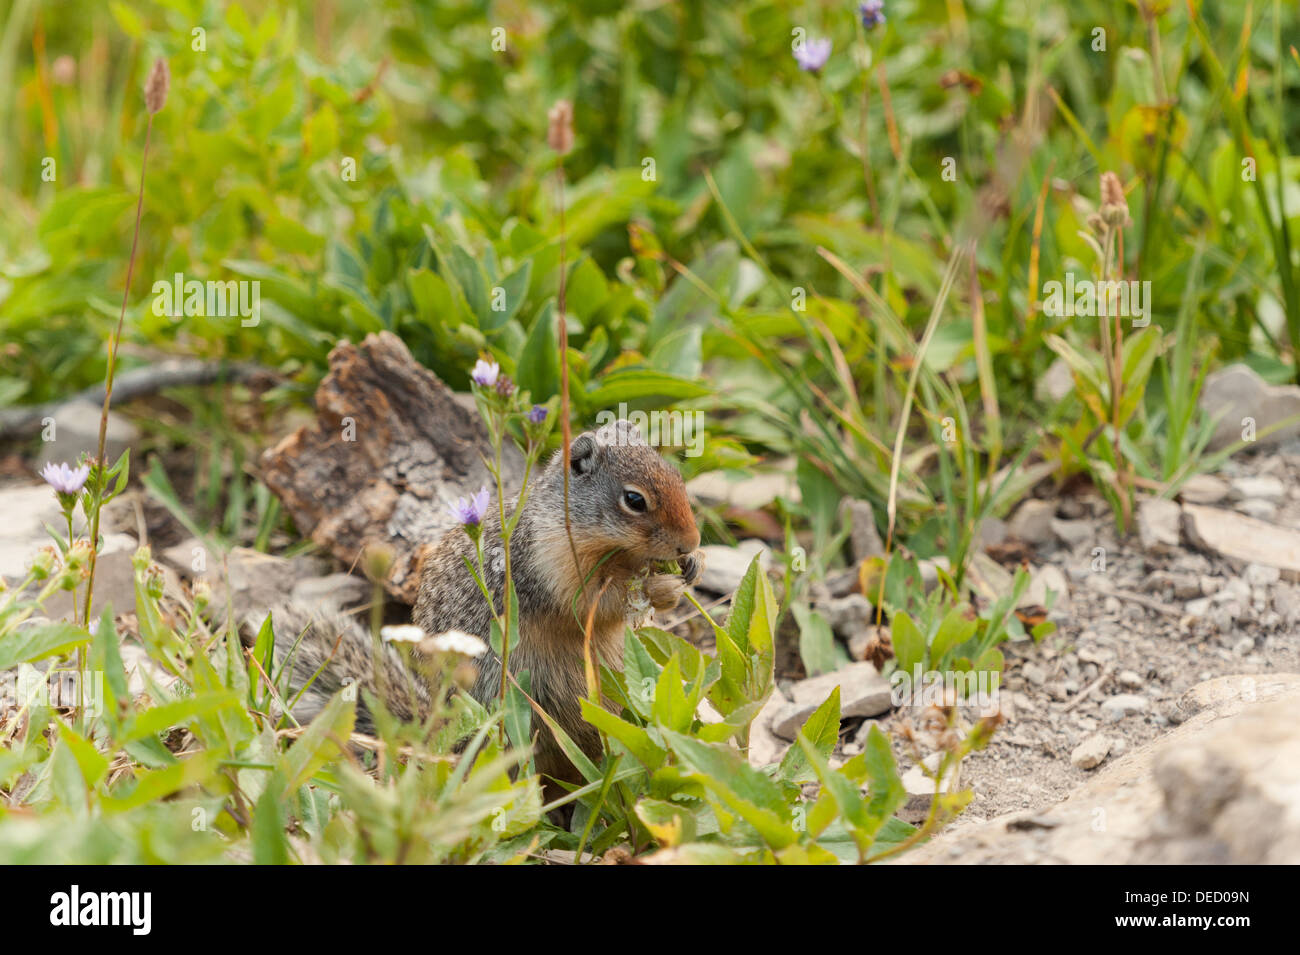 Photograph of a Ground Squirrel gathering food for the winter months in the alpine tundra of Glacier National Park. Stock Photo